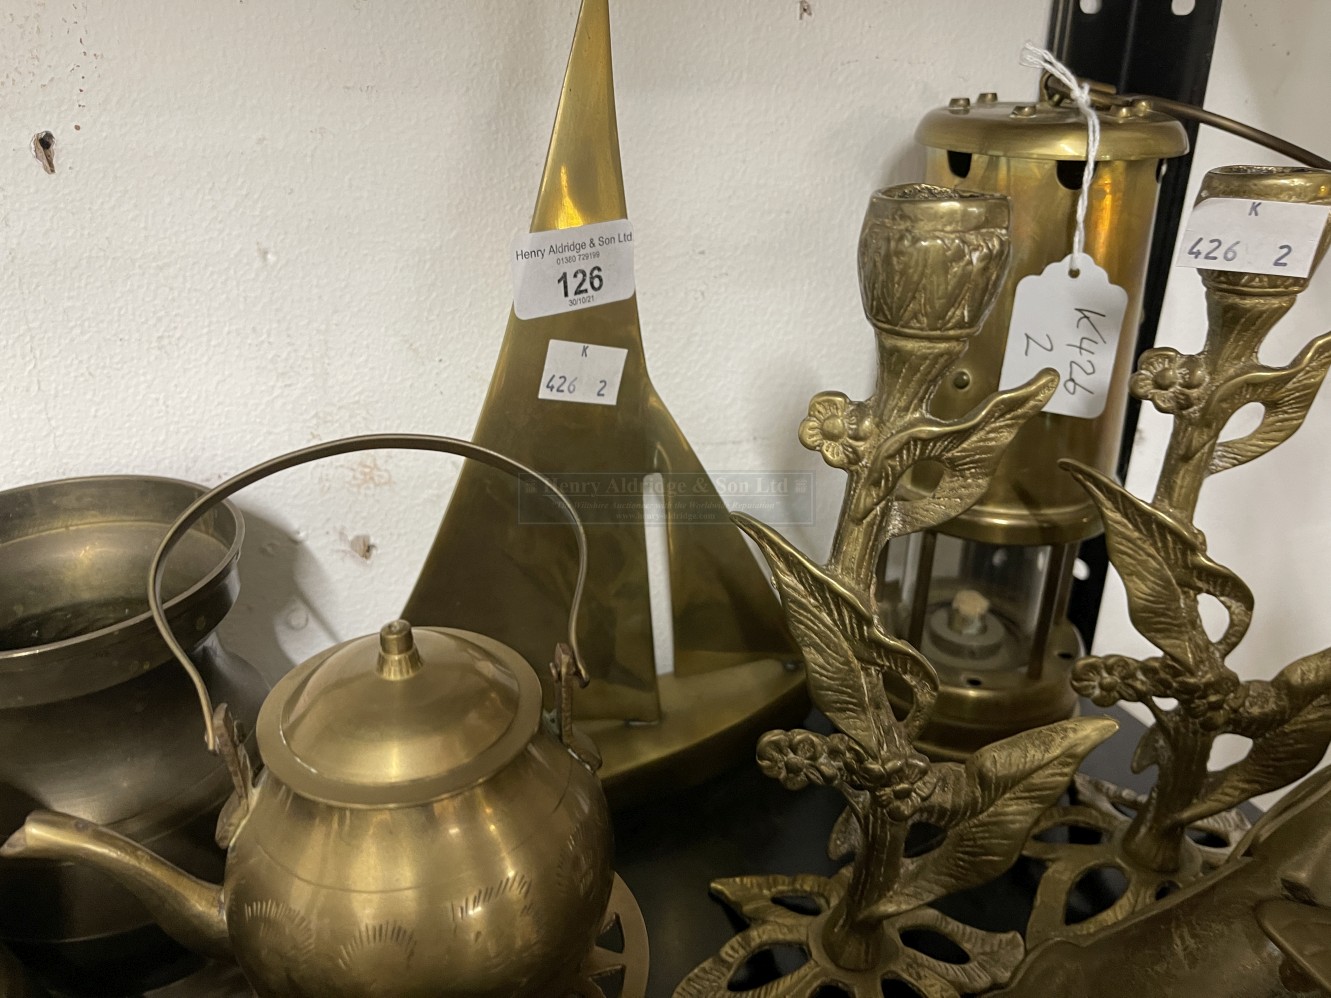 Brassware: Five graduated tankards, horse and carriage figure, two reproduction miners lamps, yacht,